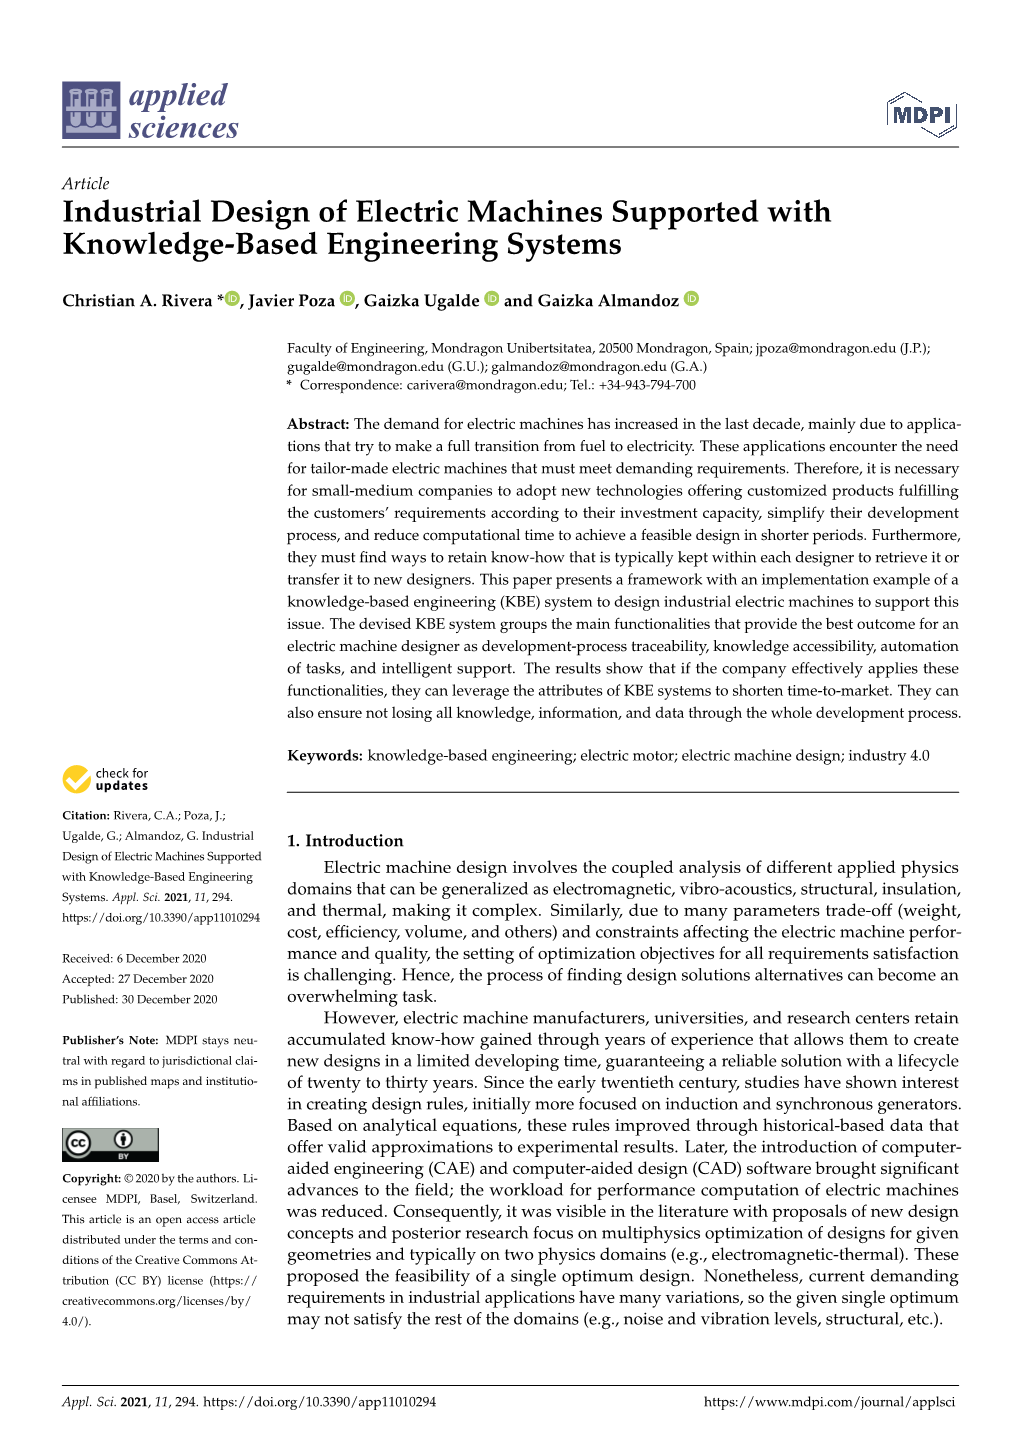 Industrial Design of Electric Machines Supported with Knowledge-Based Engineering Systems